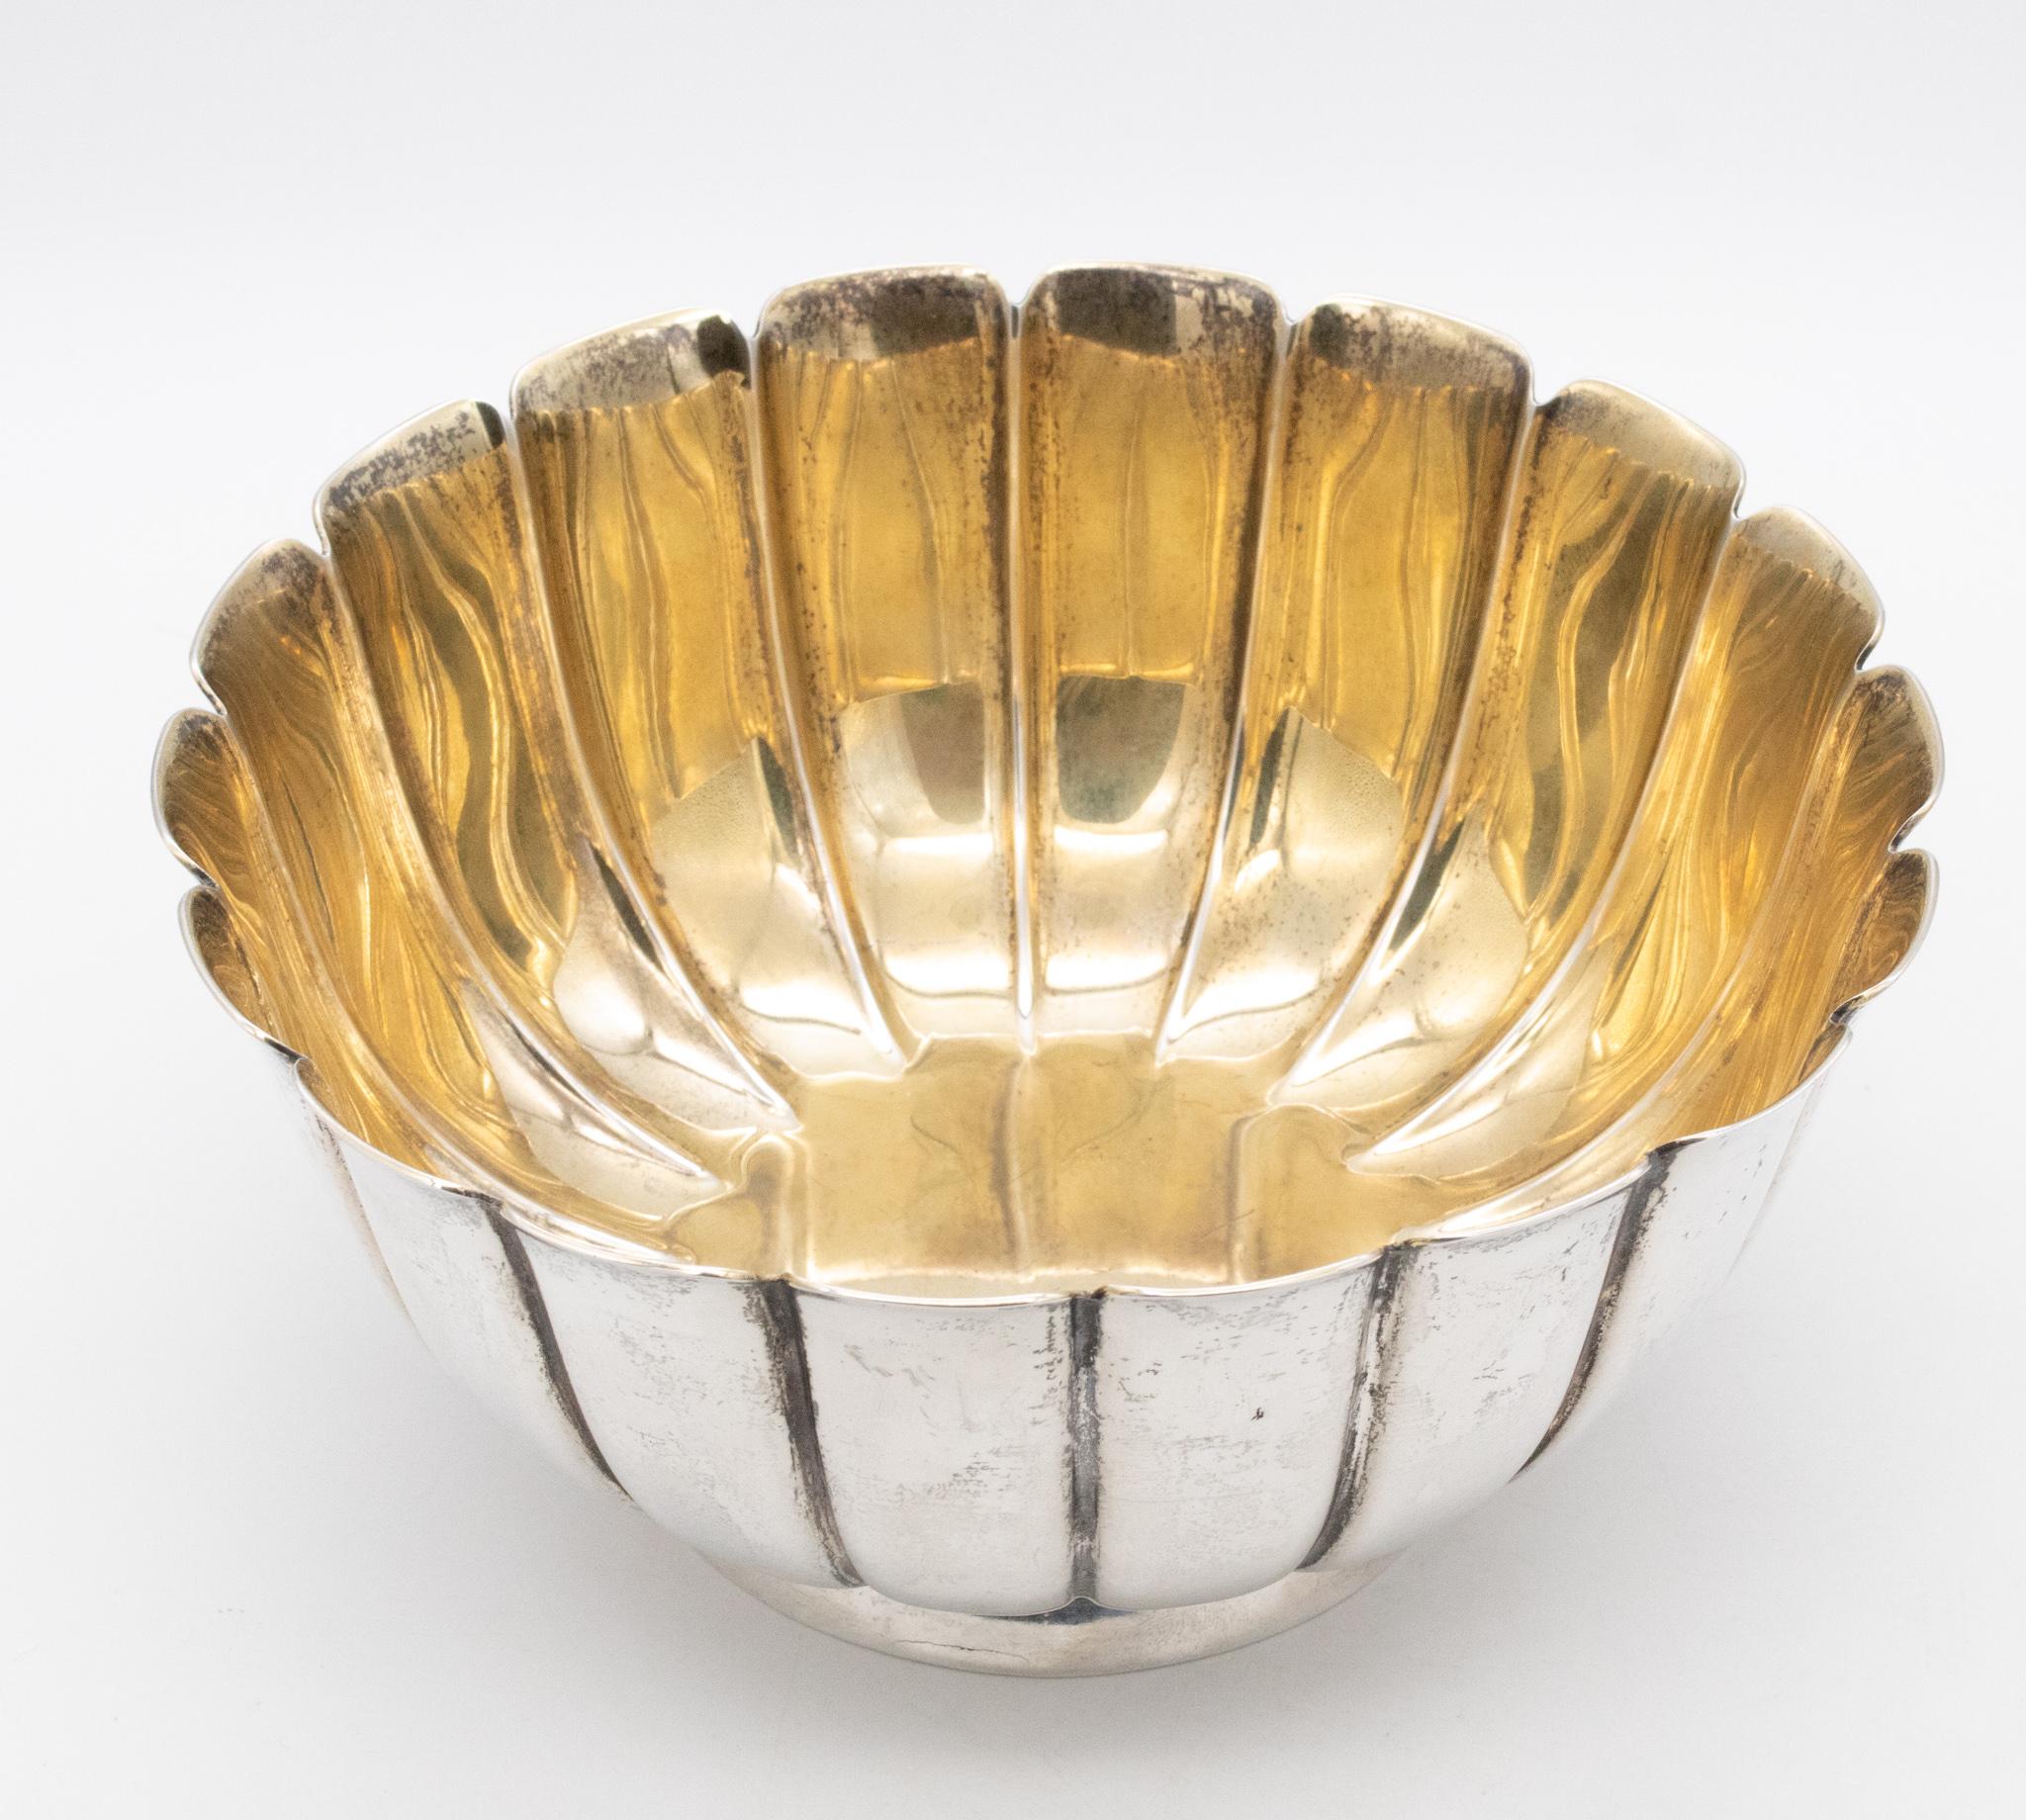 Scalloped bowl dish designed by Bvlgari.

Beautiful vintage fluted piece made in Rome, Italy by the luxury house of Bulgari. This large scalloped dish has been carefully crafted in solid .925/.999 sterling silver with 24 kt gold gilding in the